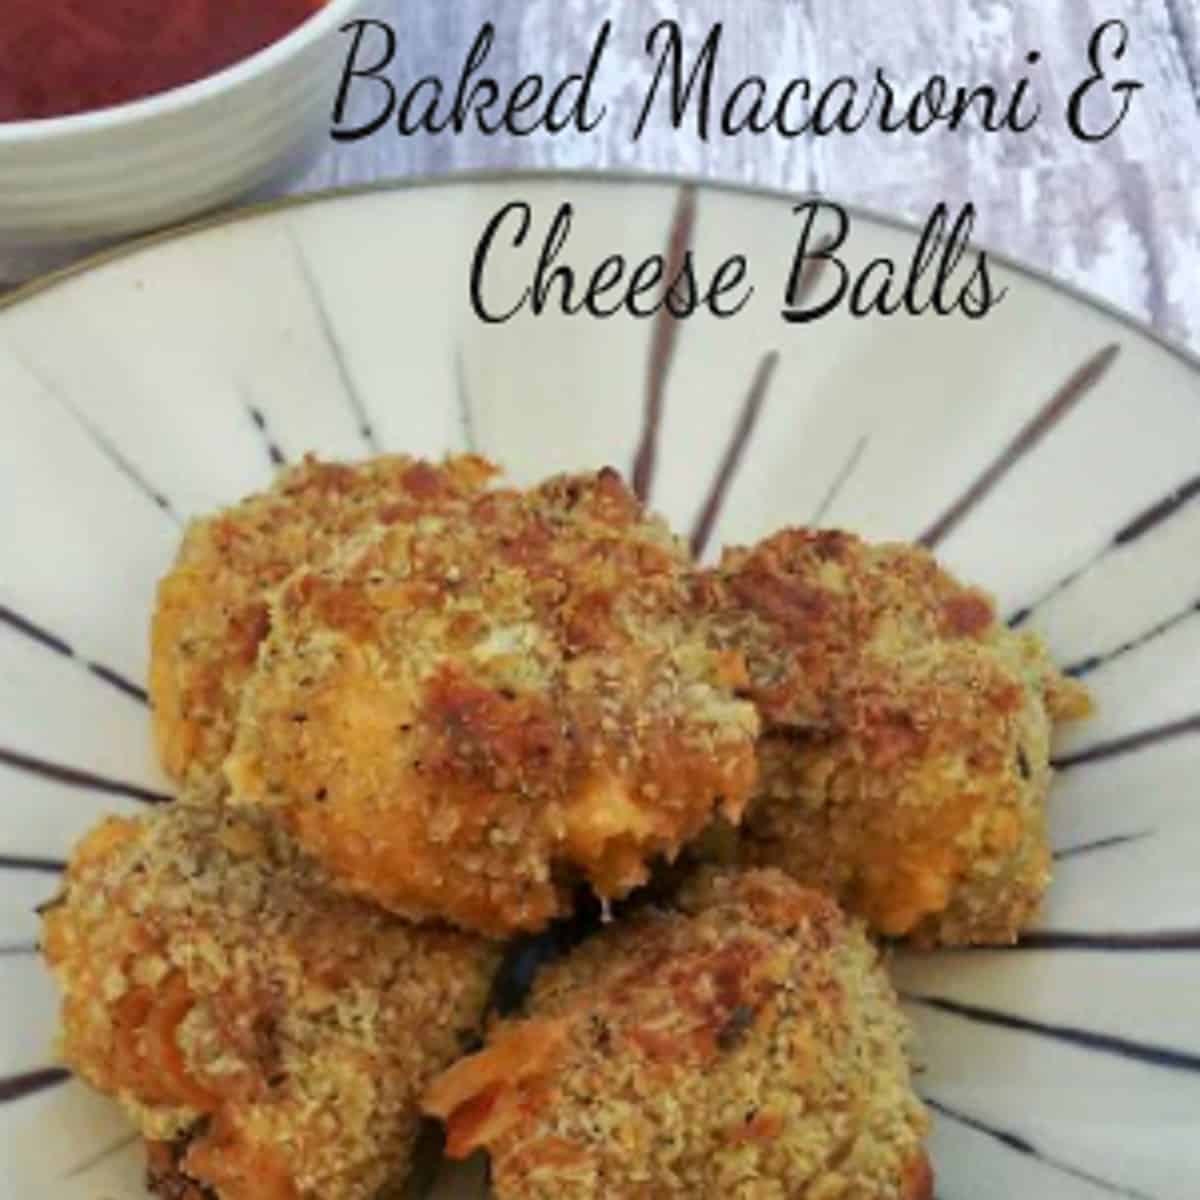  A plate of baked macaroni and cheese balls with a side of marinara sauce for dipping. The macaroni and cheese balls are golden brown and crispy on the outside, and cheesy and gooey on the inside. The marinara sauce is red and chunky.